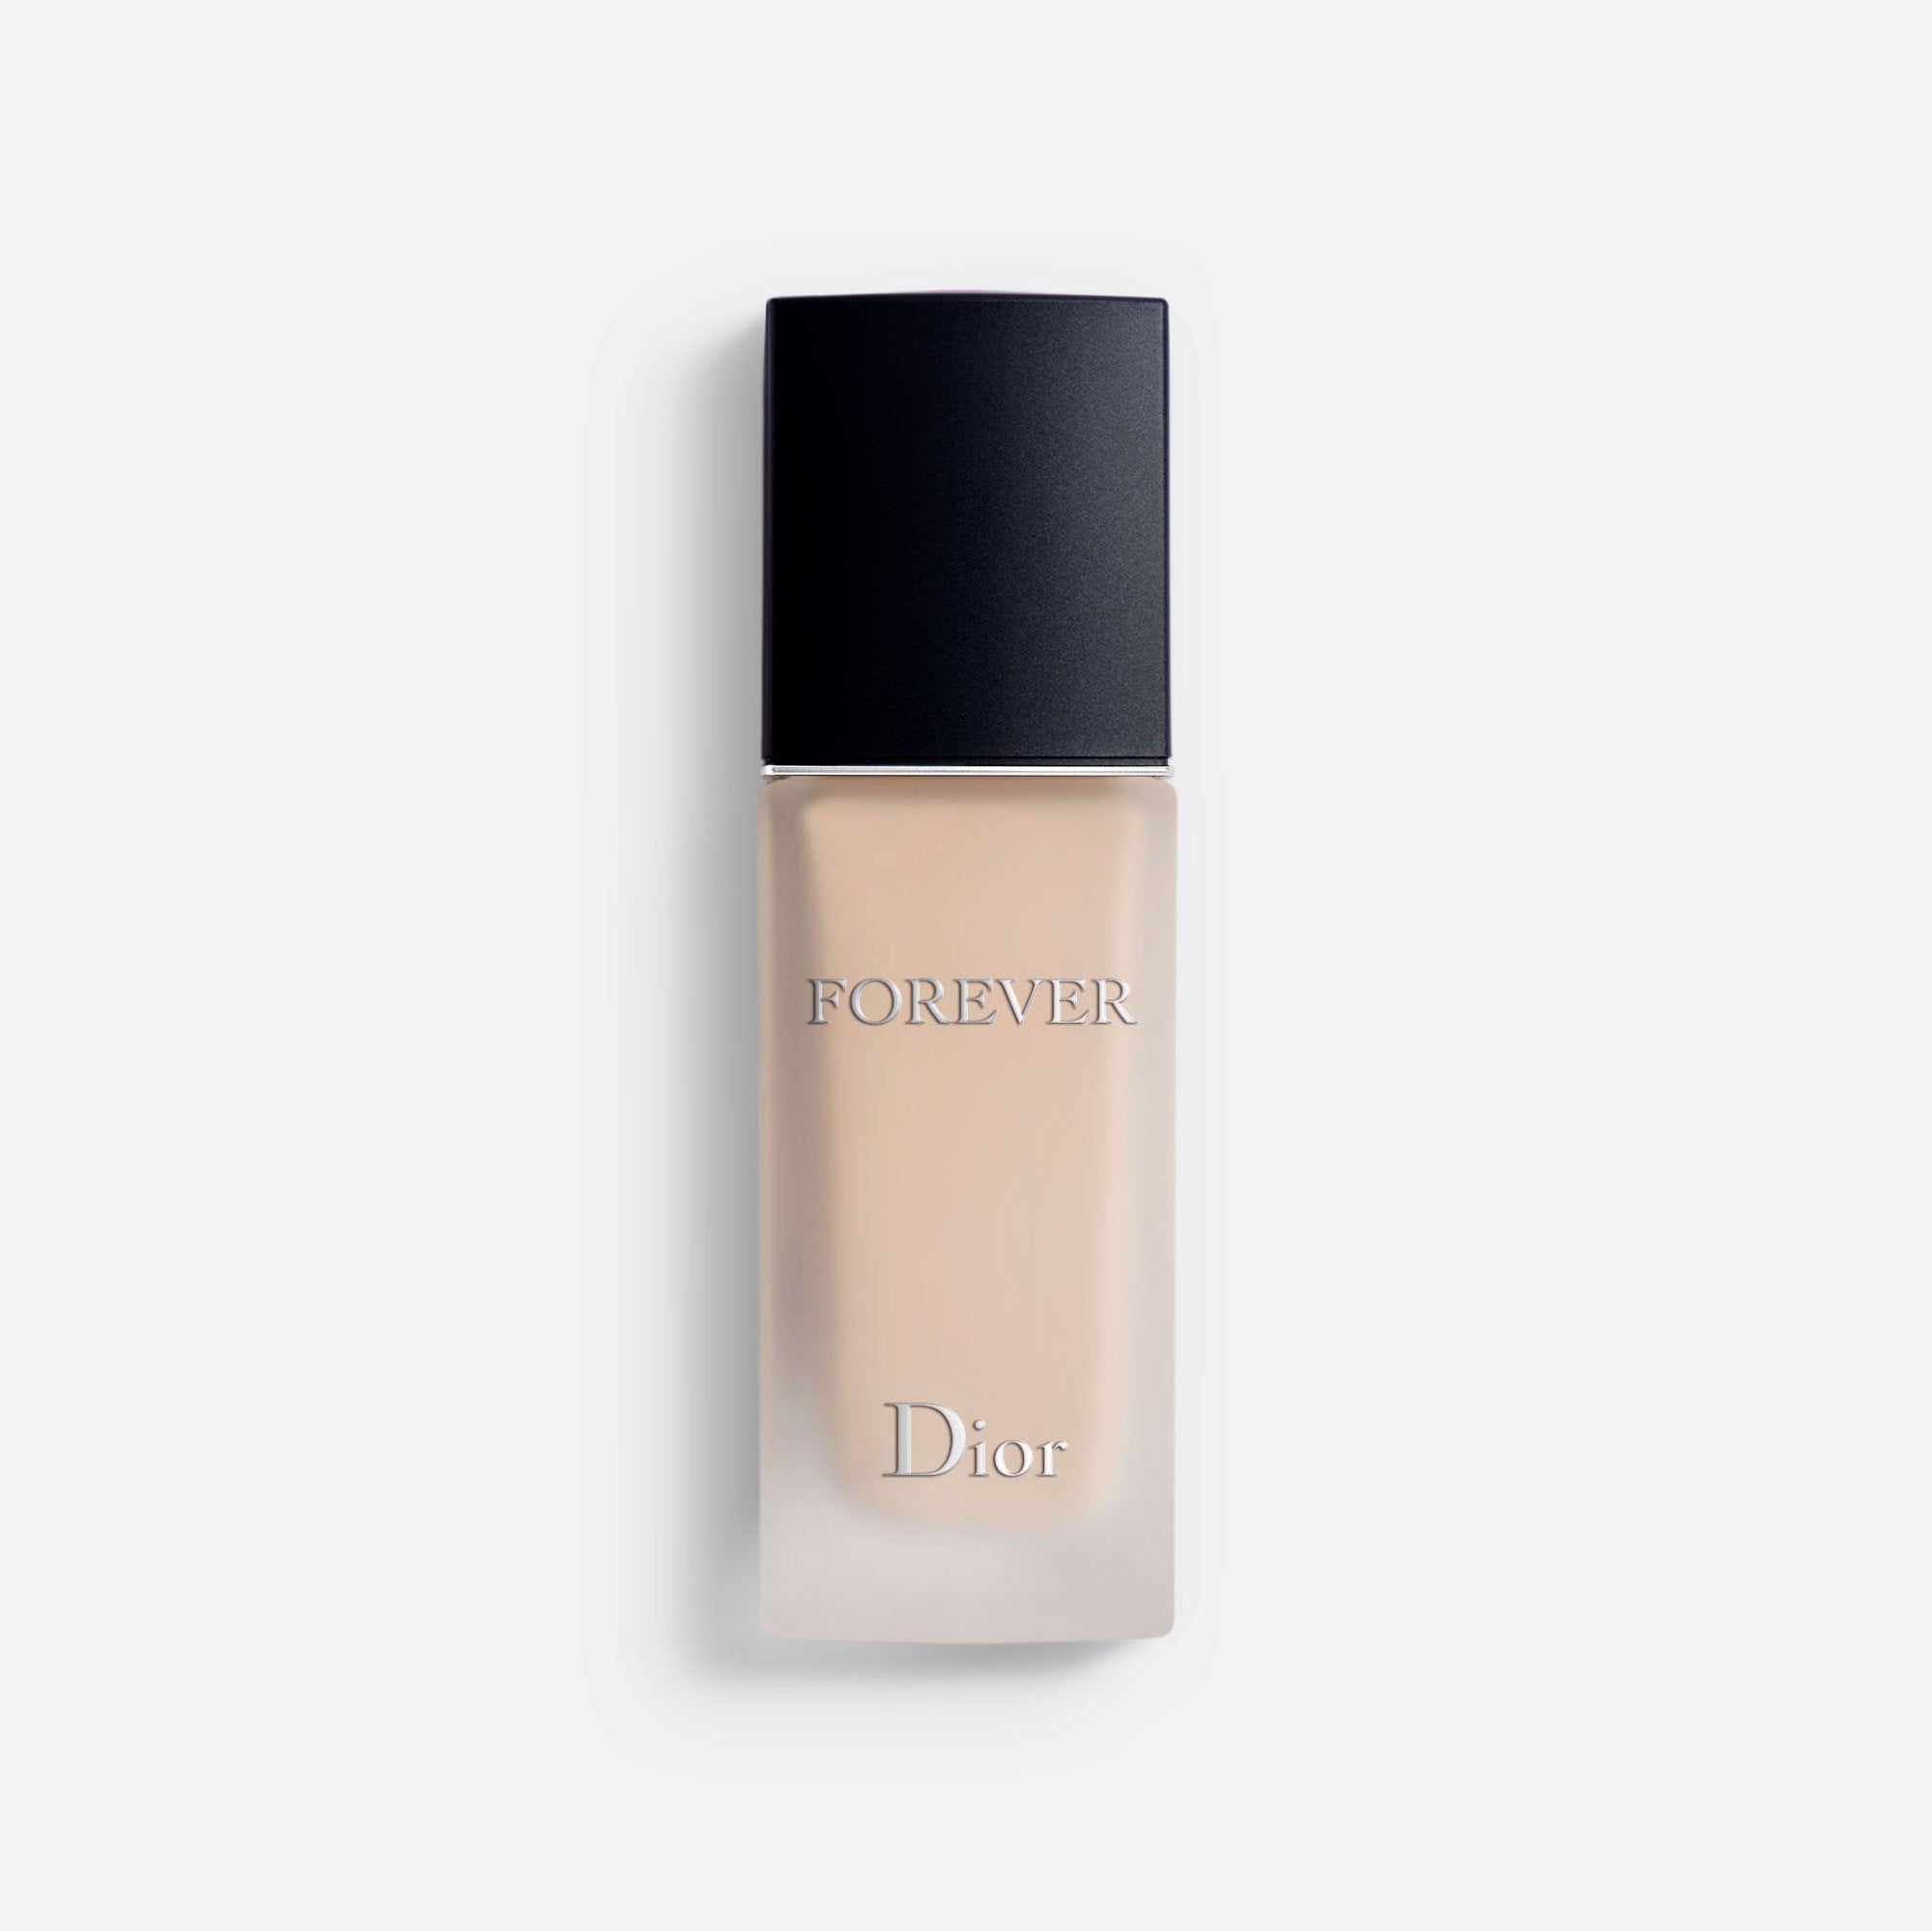 DIOR FOREVER | Clean Matte Foundation - 24h Wear - No Transfer - Concentrated Floral Skincare